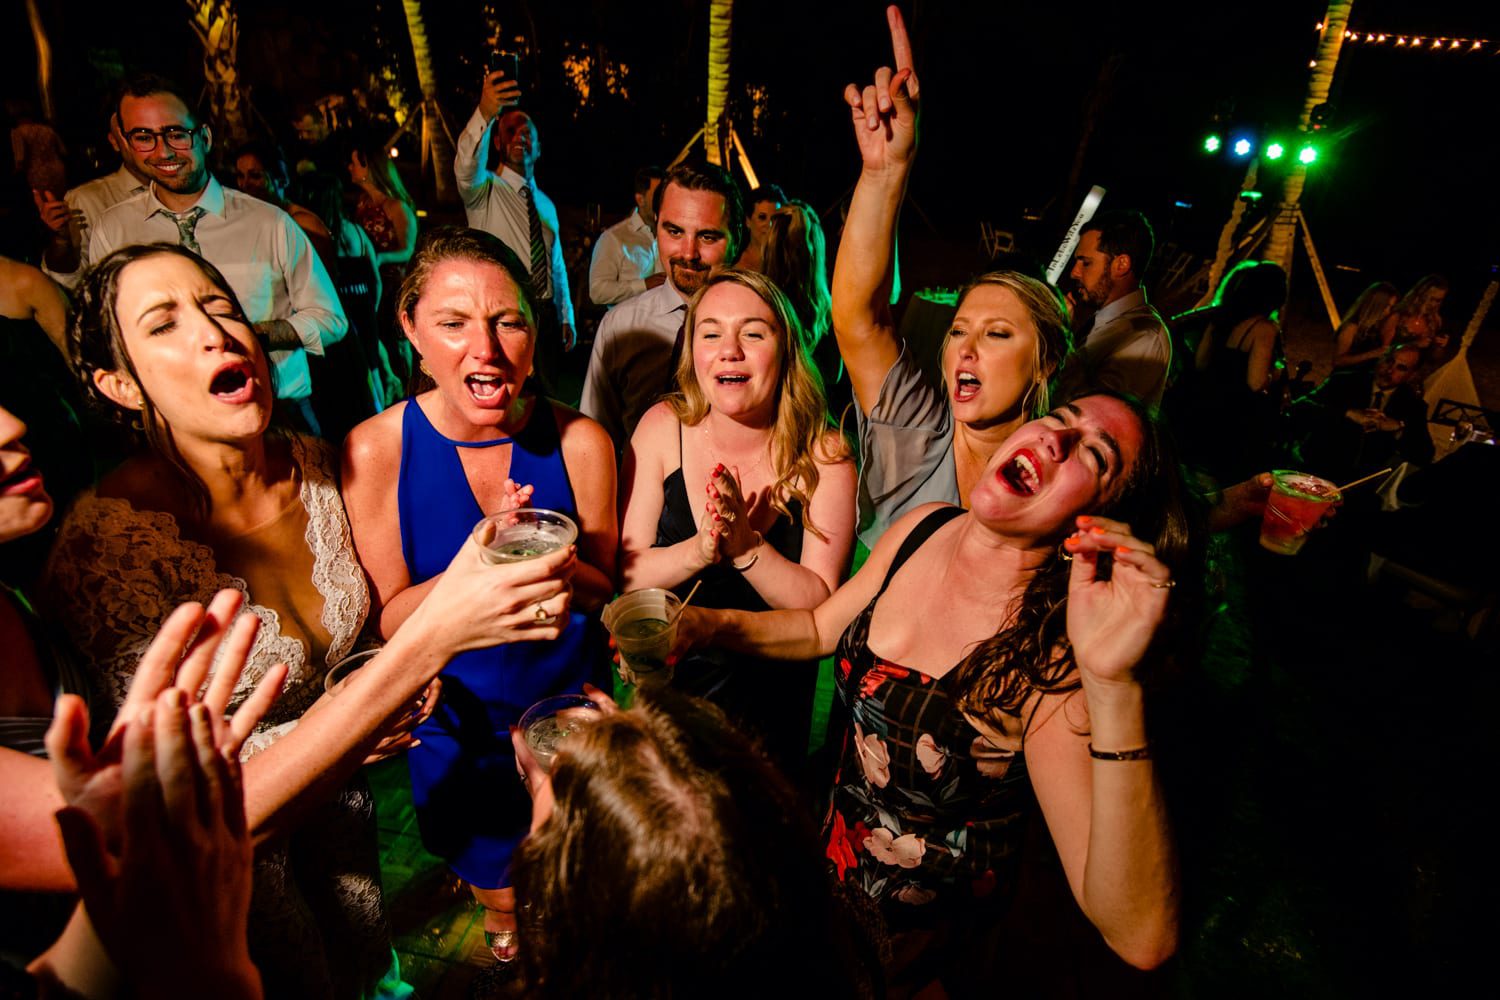 A group of people celebrating at a wedding party.